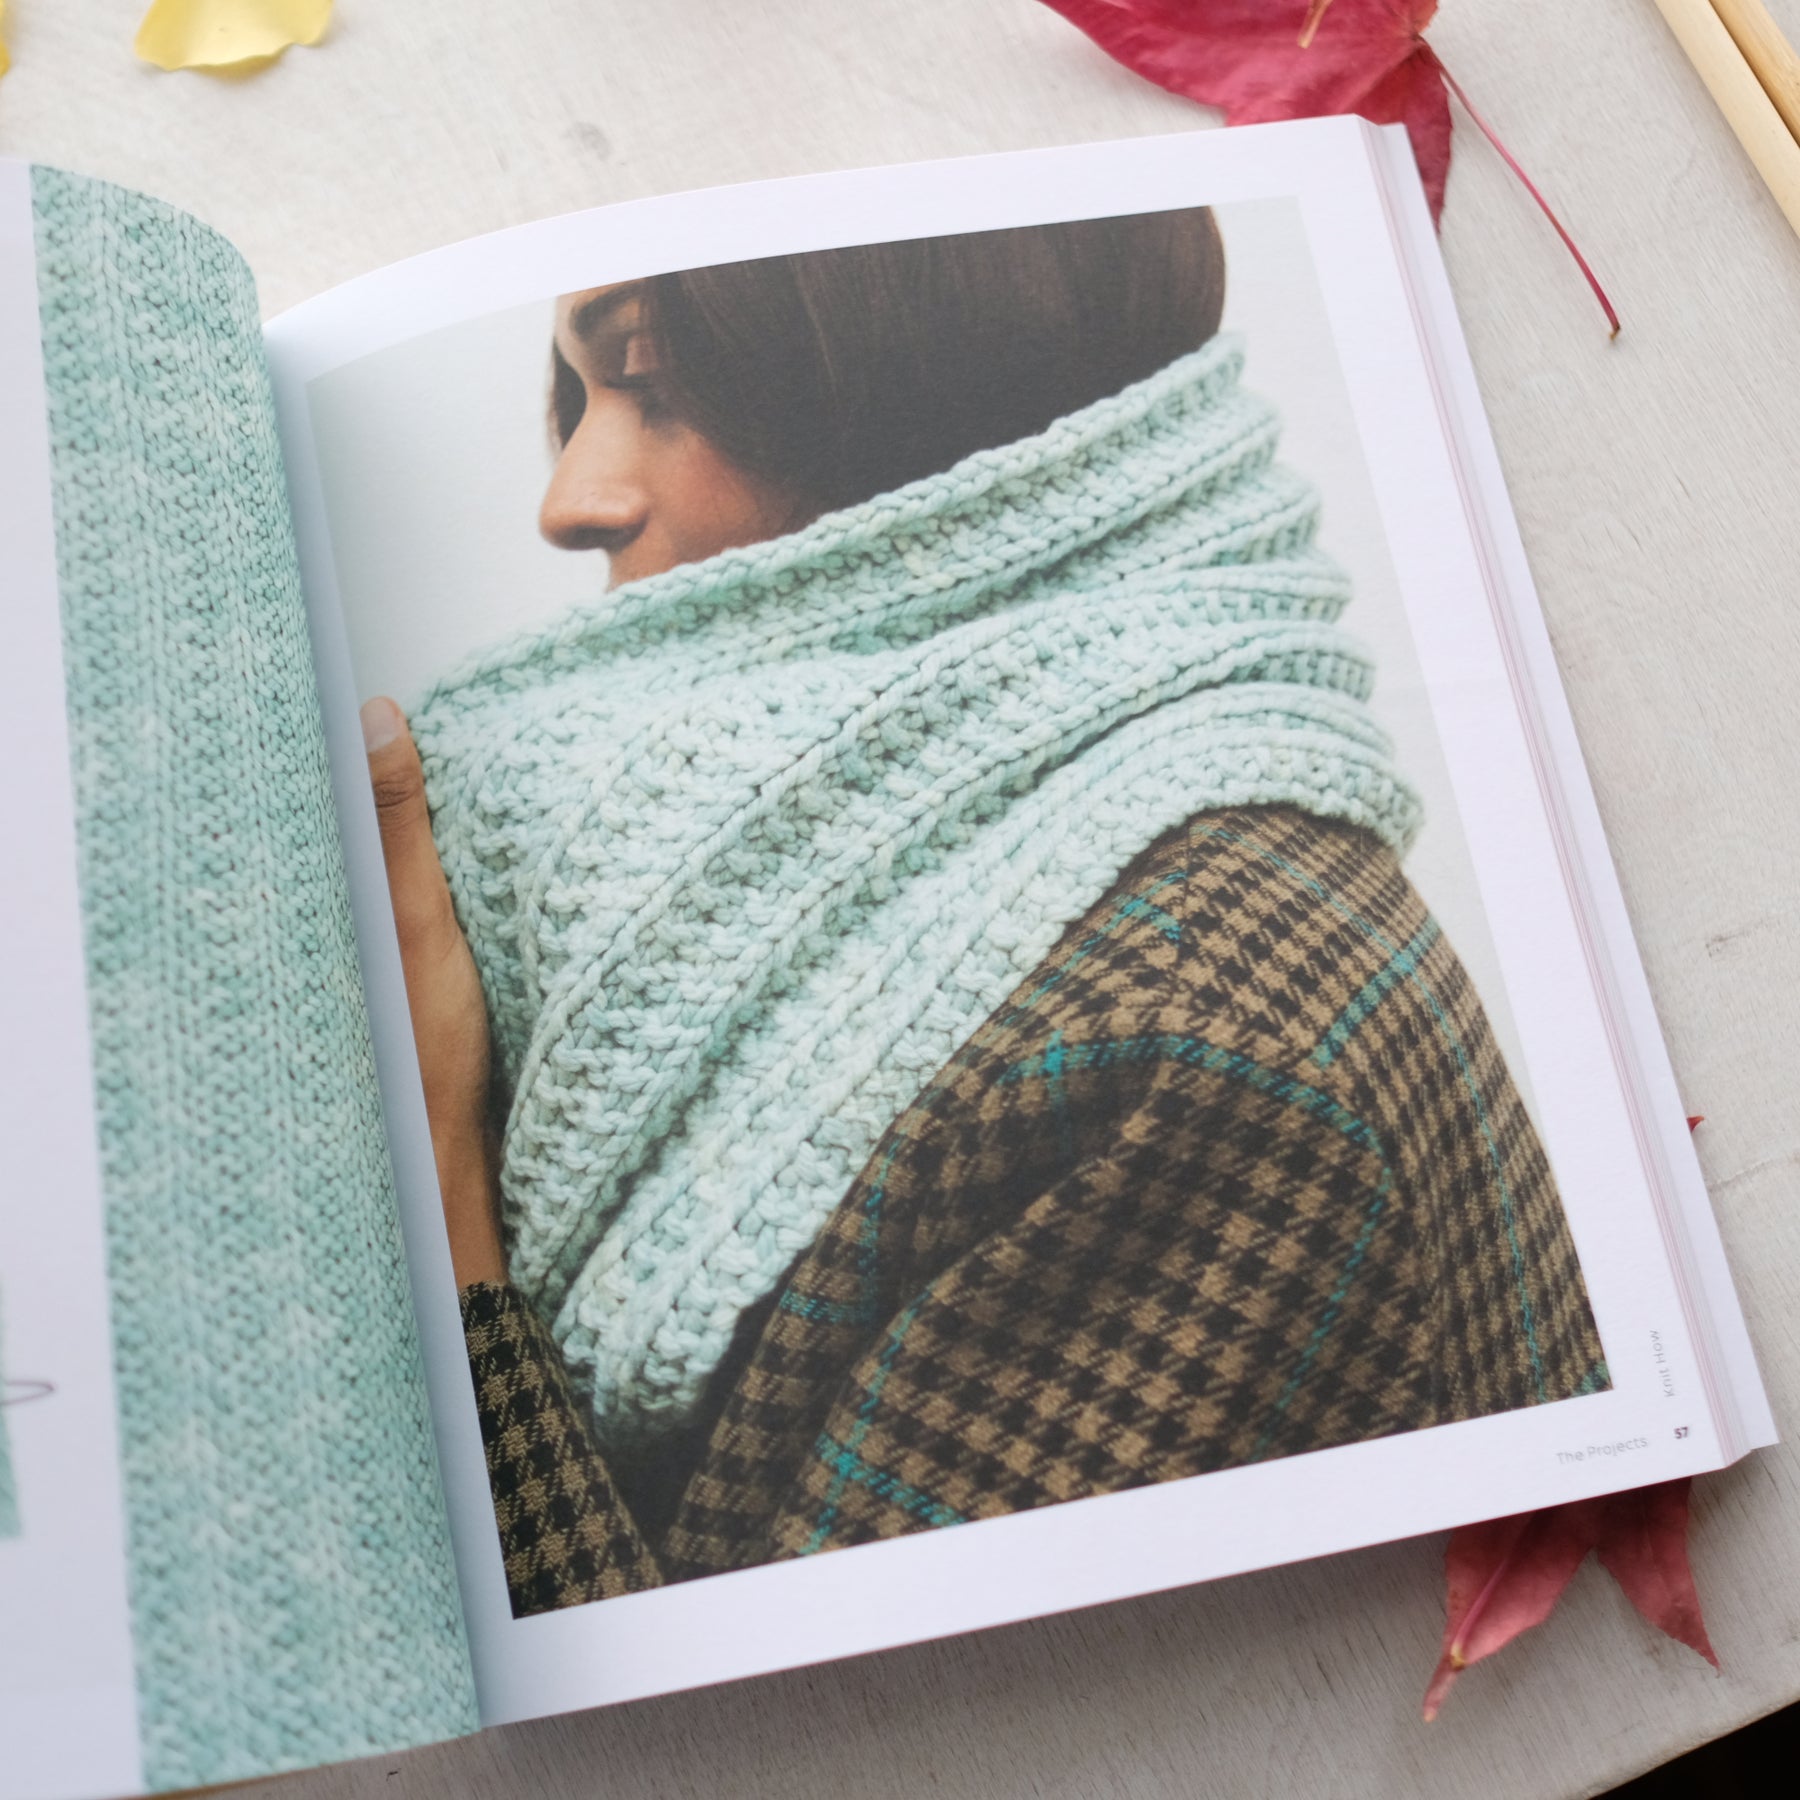 BEGINNERS KNITTING KIT, Beginners Simple Quick Knitting Pattern, Chunky Knit  Scarf Diy, Easy Knitting Project Kit, Complete Knit Kit 